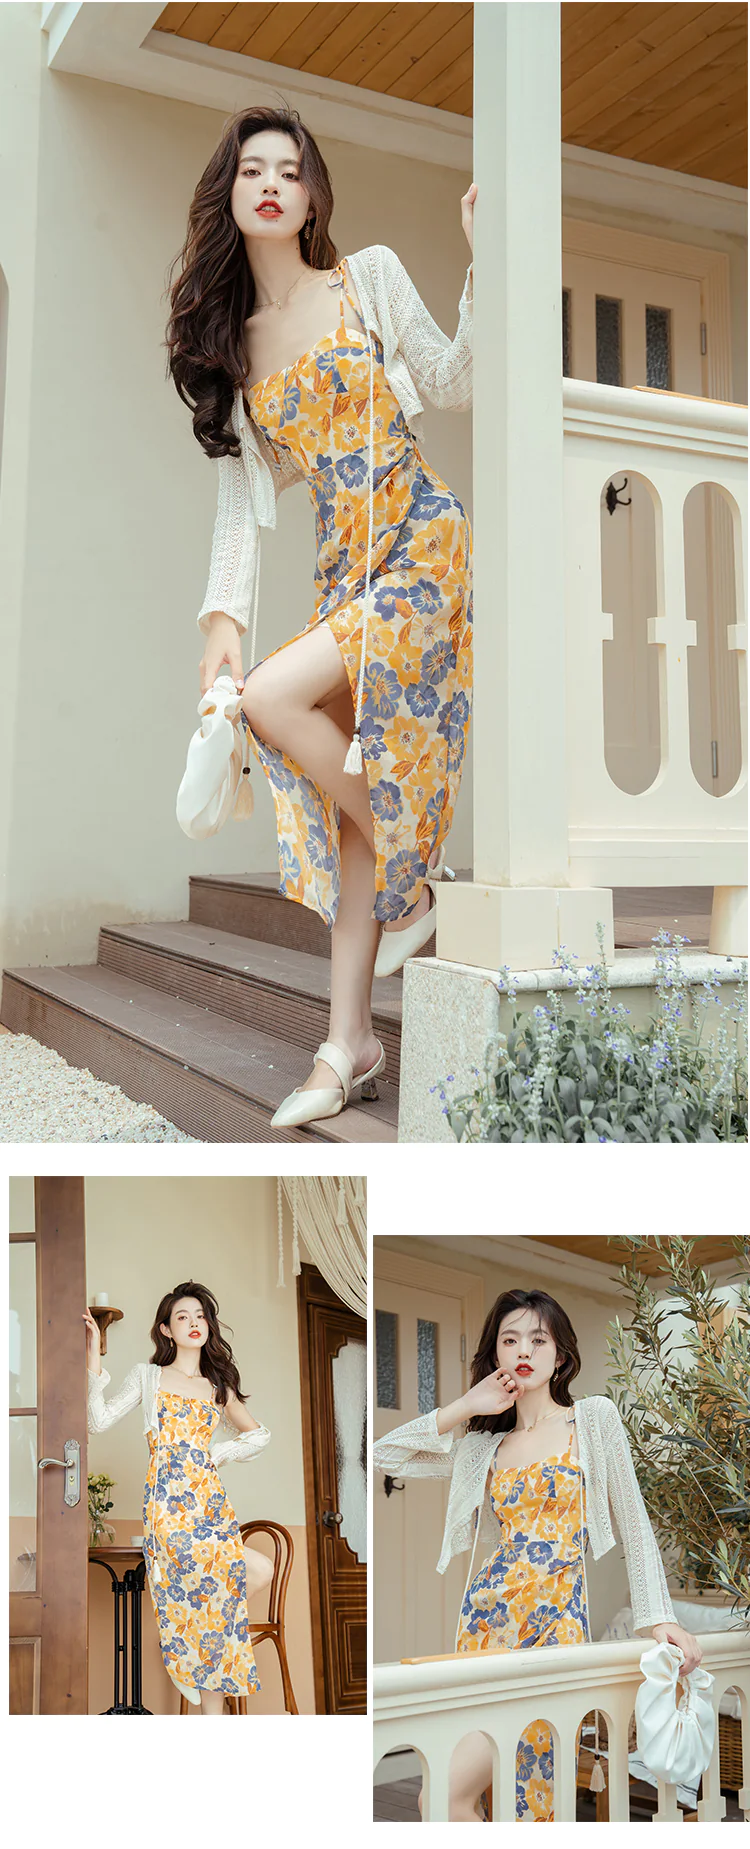 Sweet-Floral-Printed-Yellow-Summer-Beach-Slip-Dress-with-Knit-Cardigan15